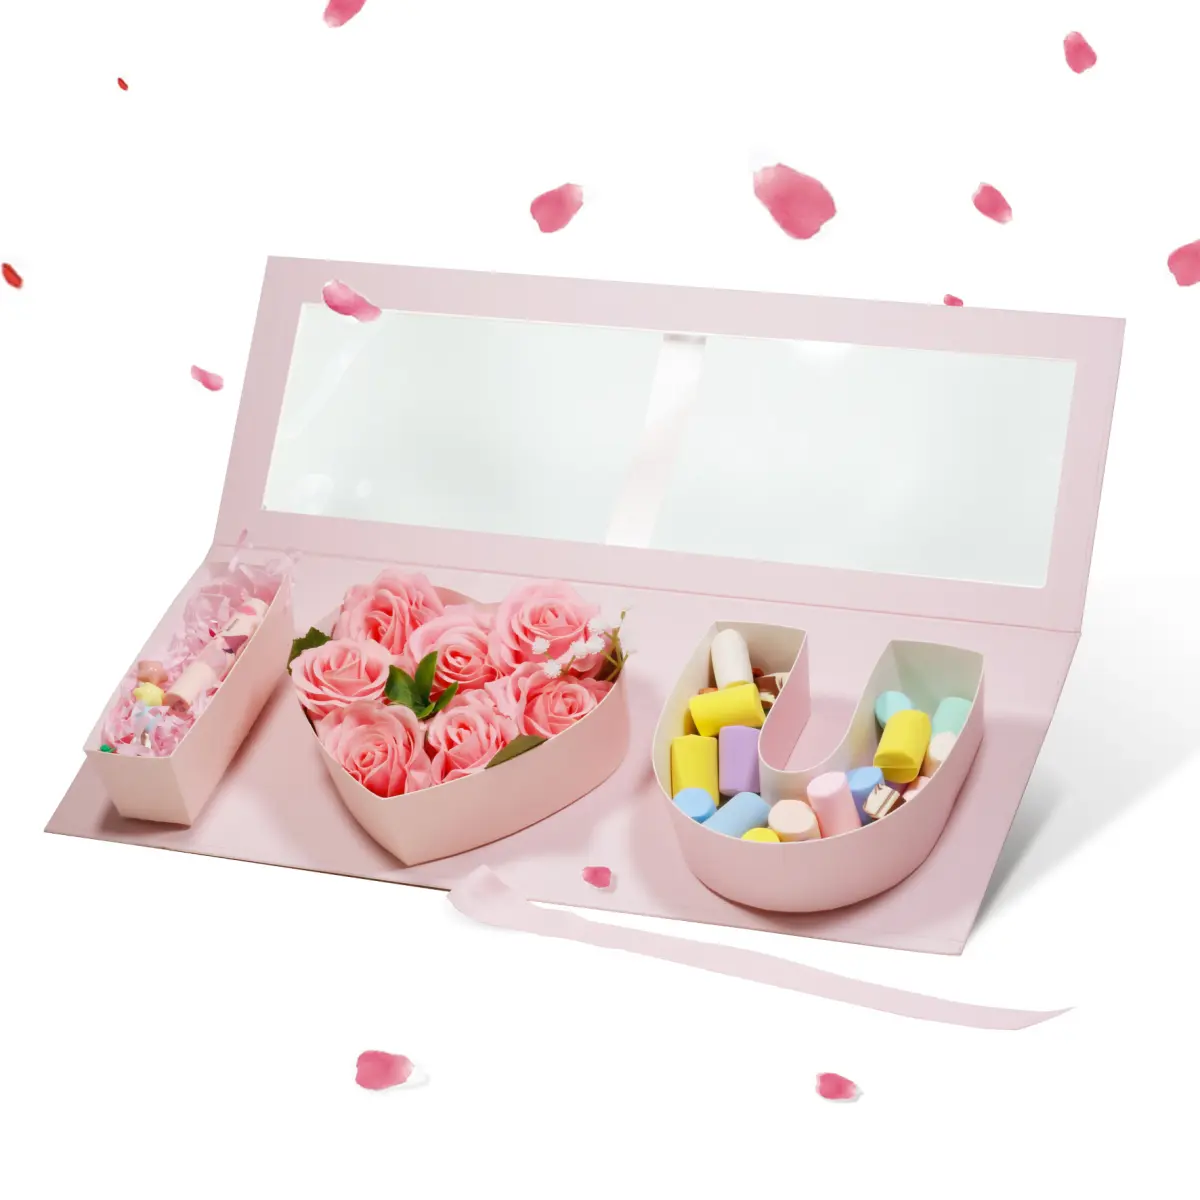 I Love You Shaped Pink Gift Box with Window